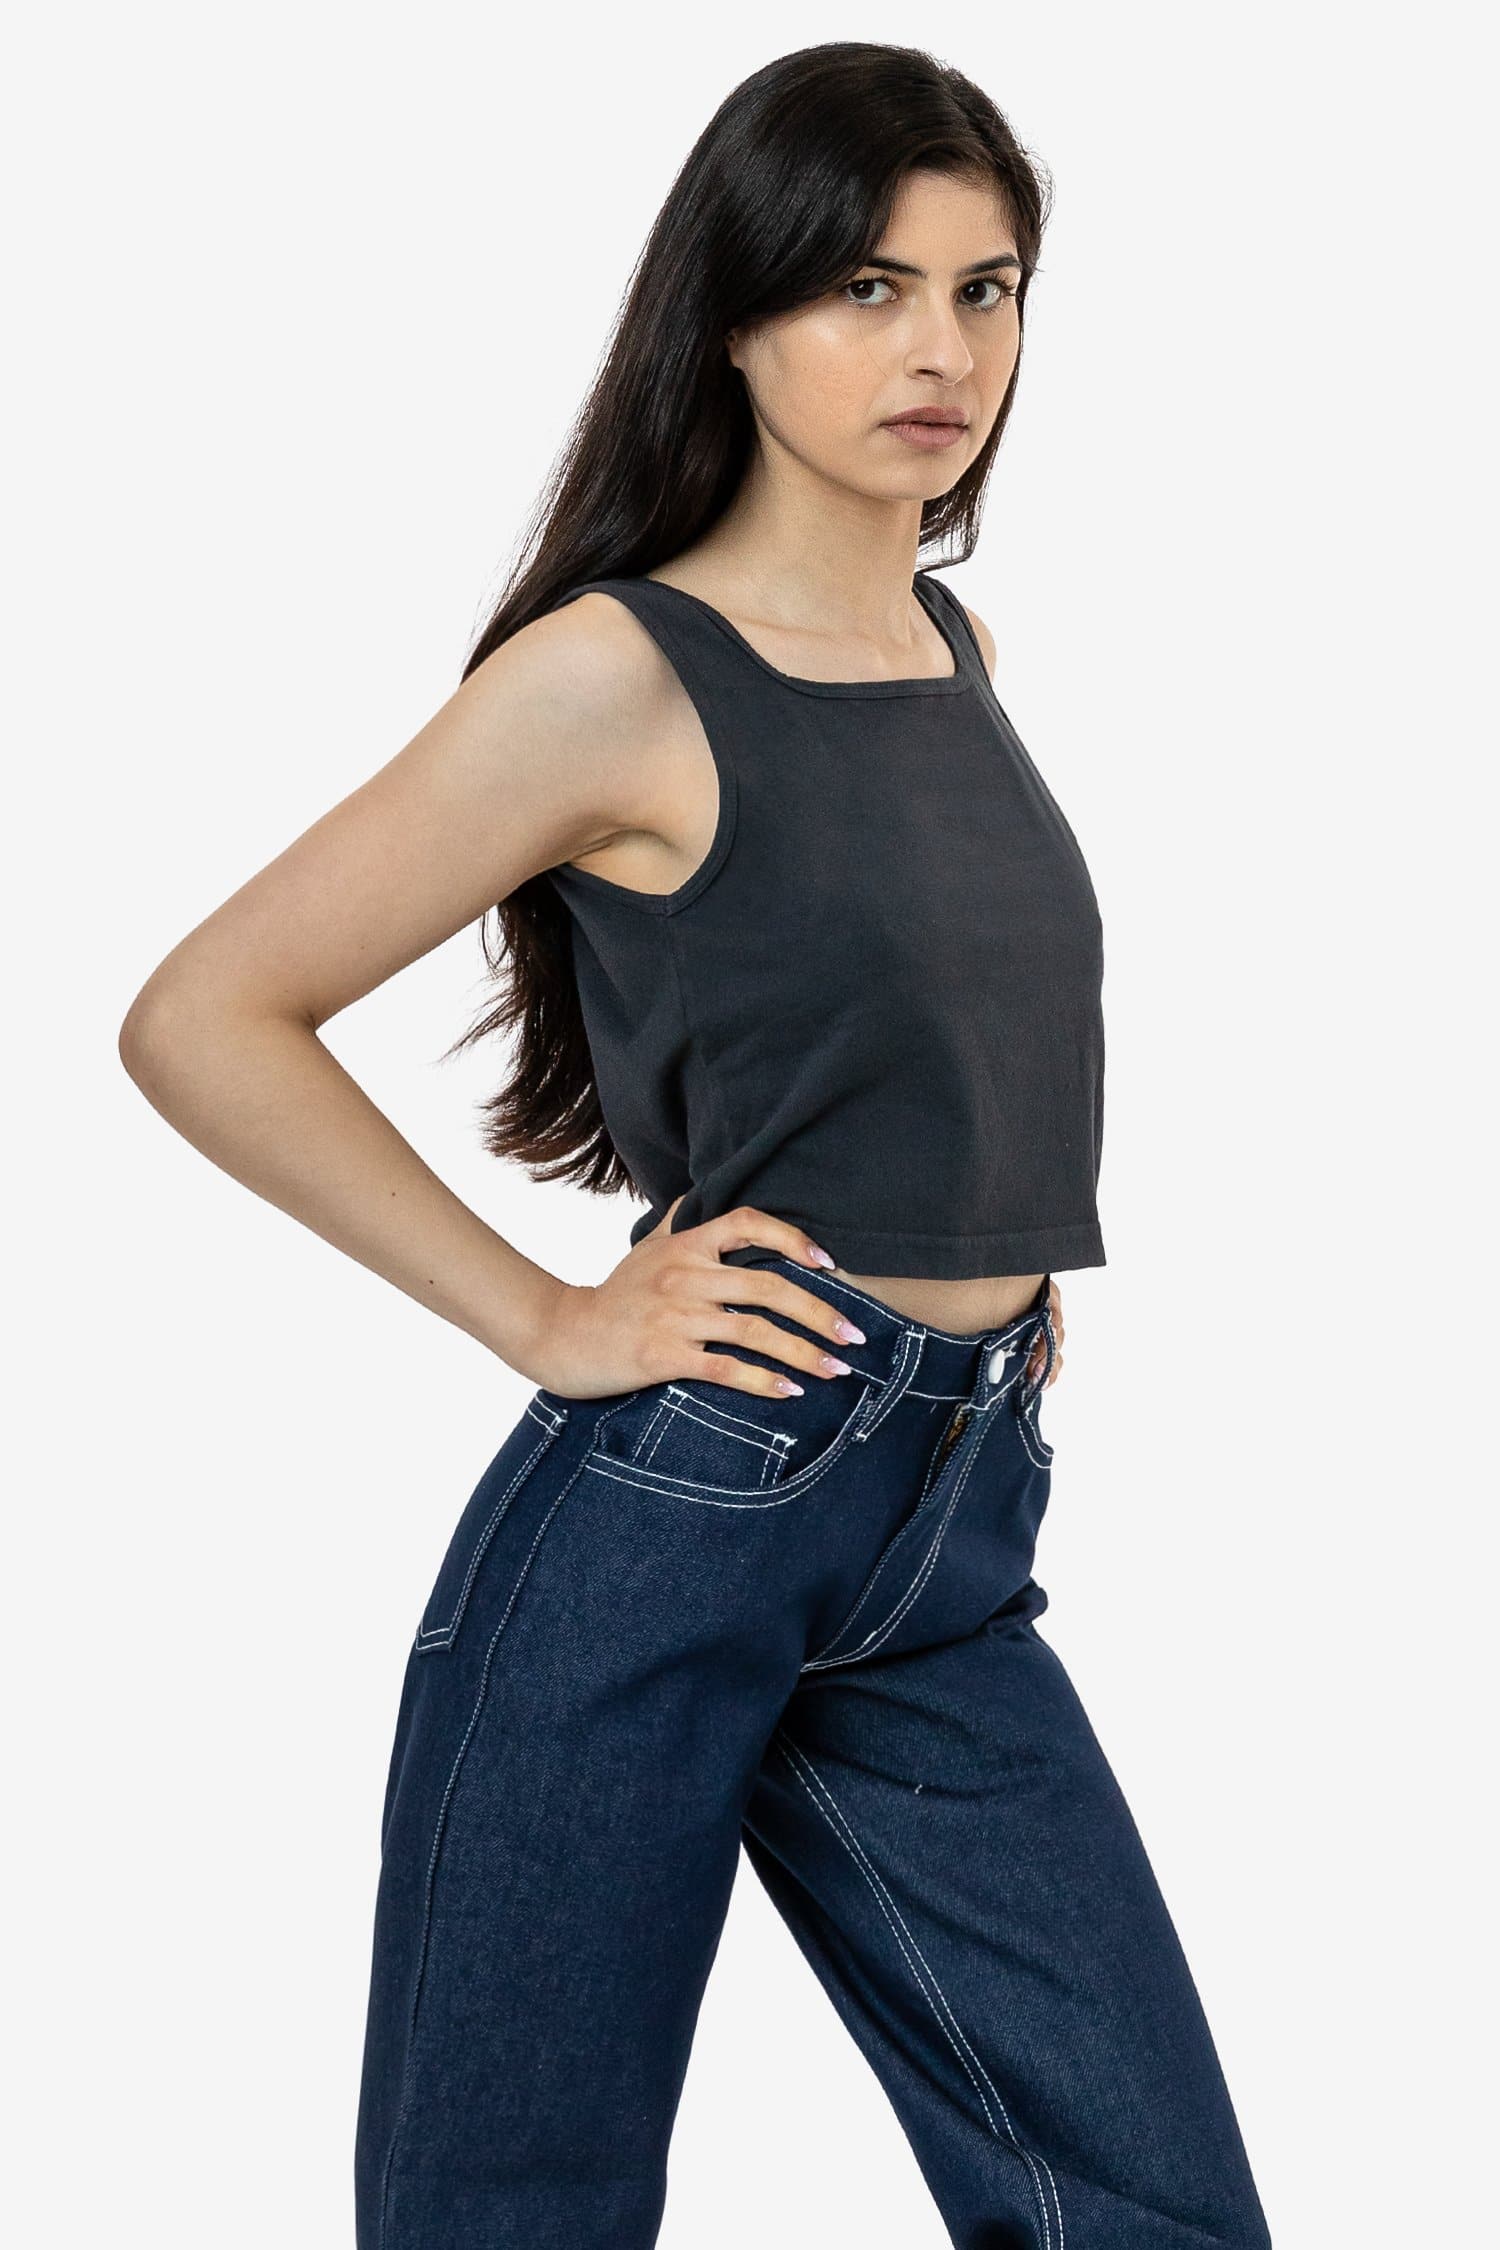 Dalis Cropped Tank  Clothes, Everyday outfits, Tank tops